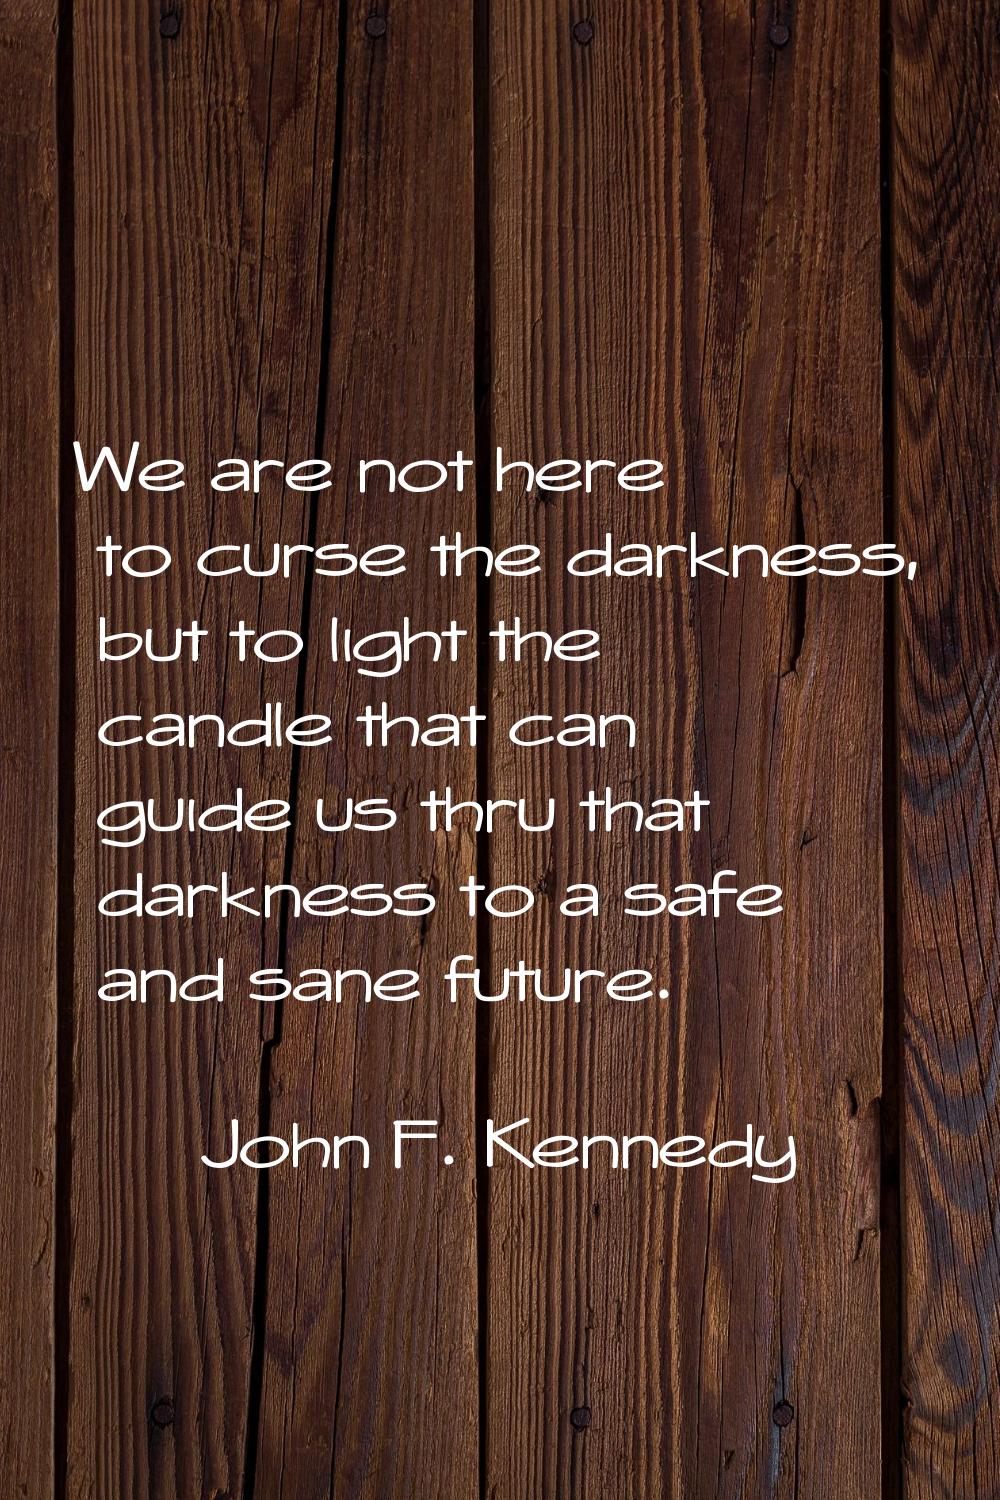 We are not here to curse the darkness, but to light the candle that can guide us thru that darkness